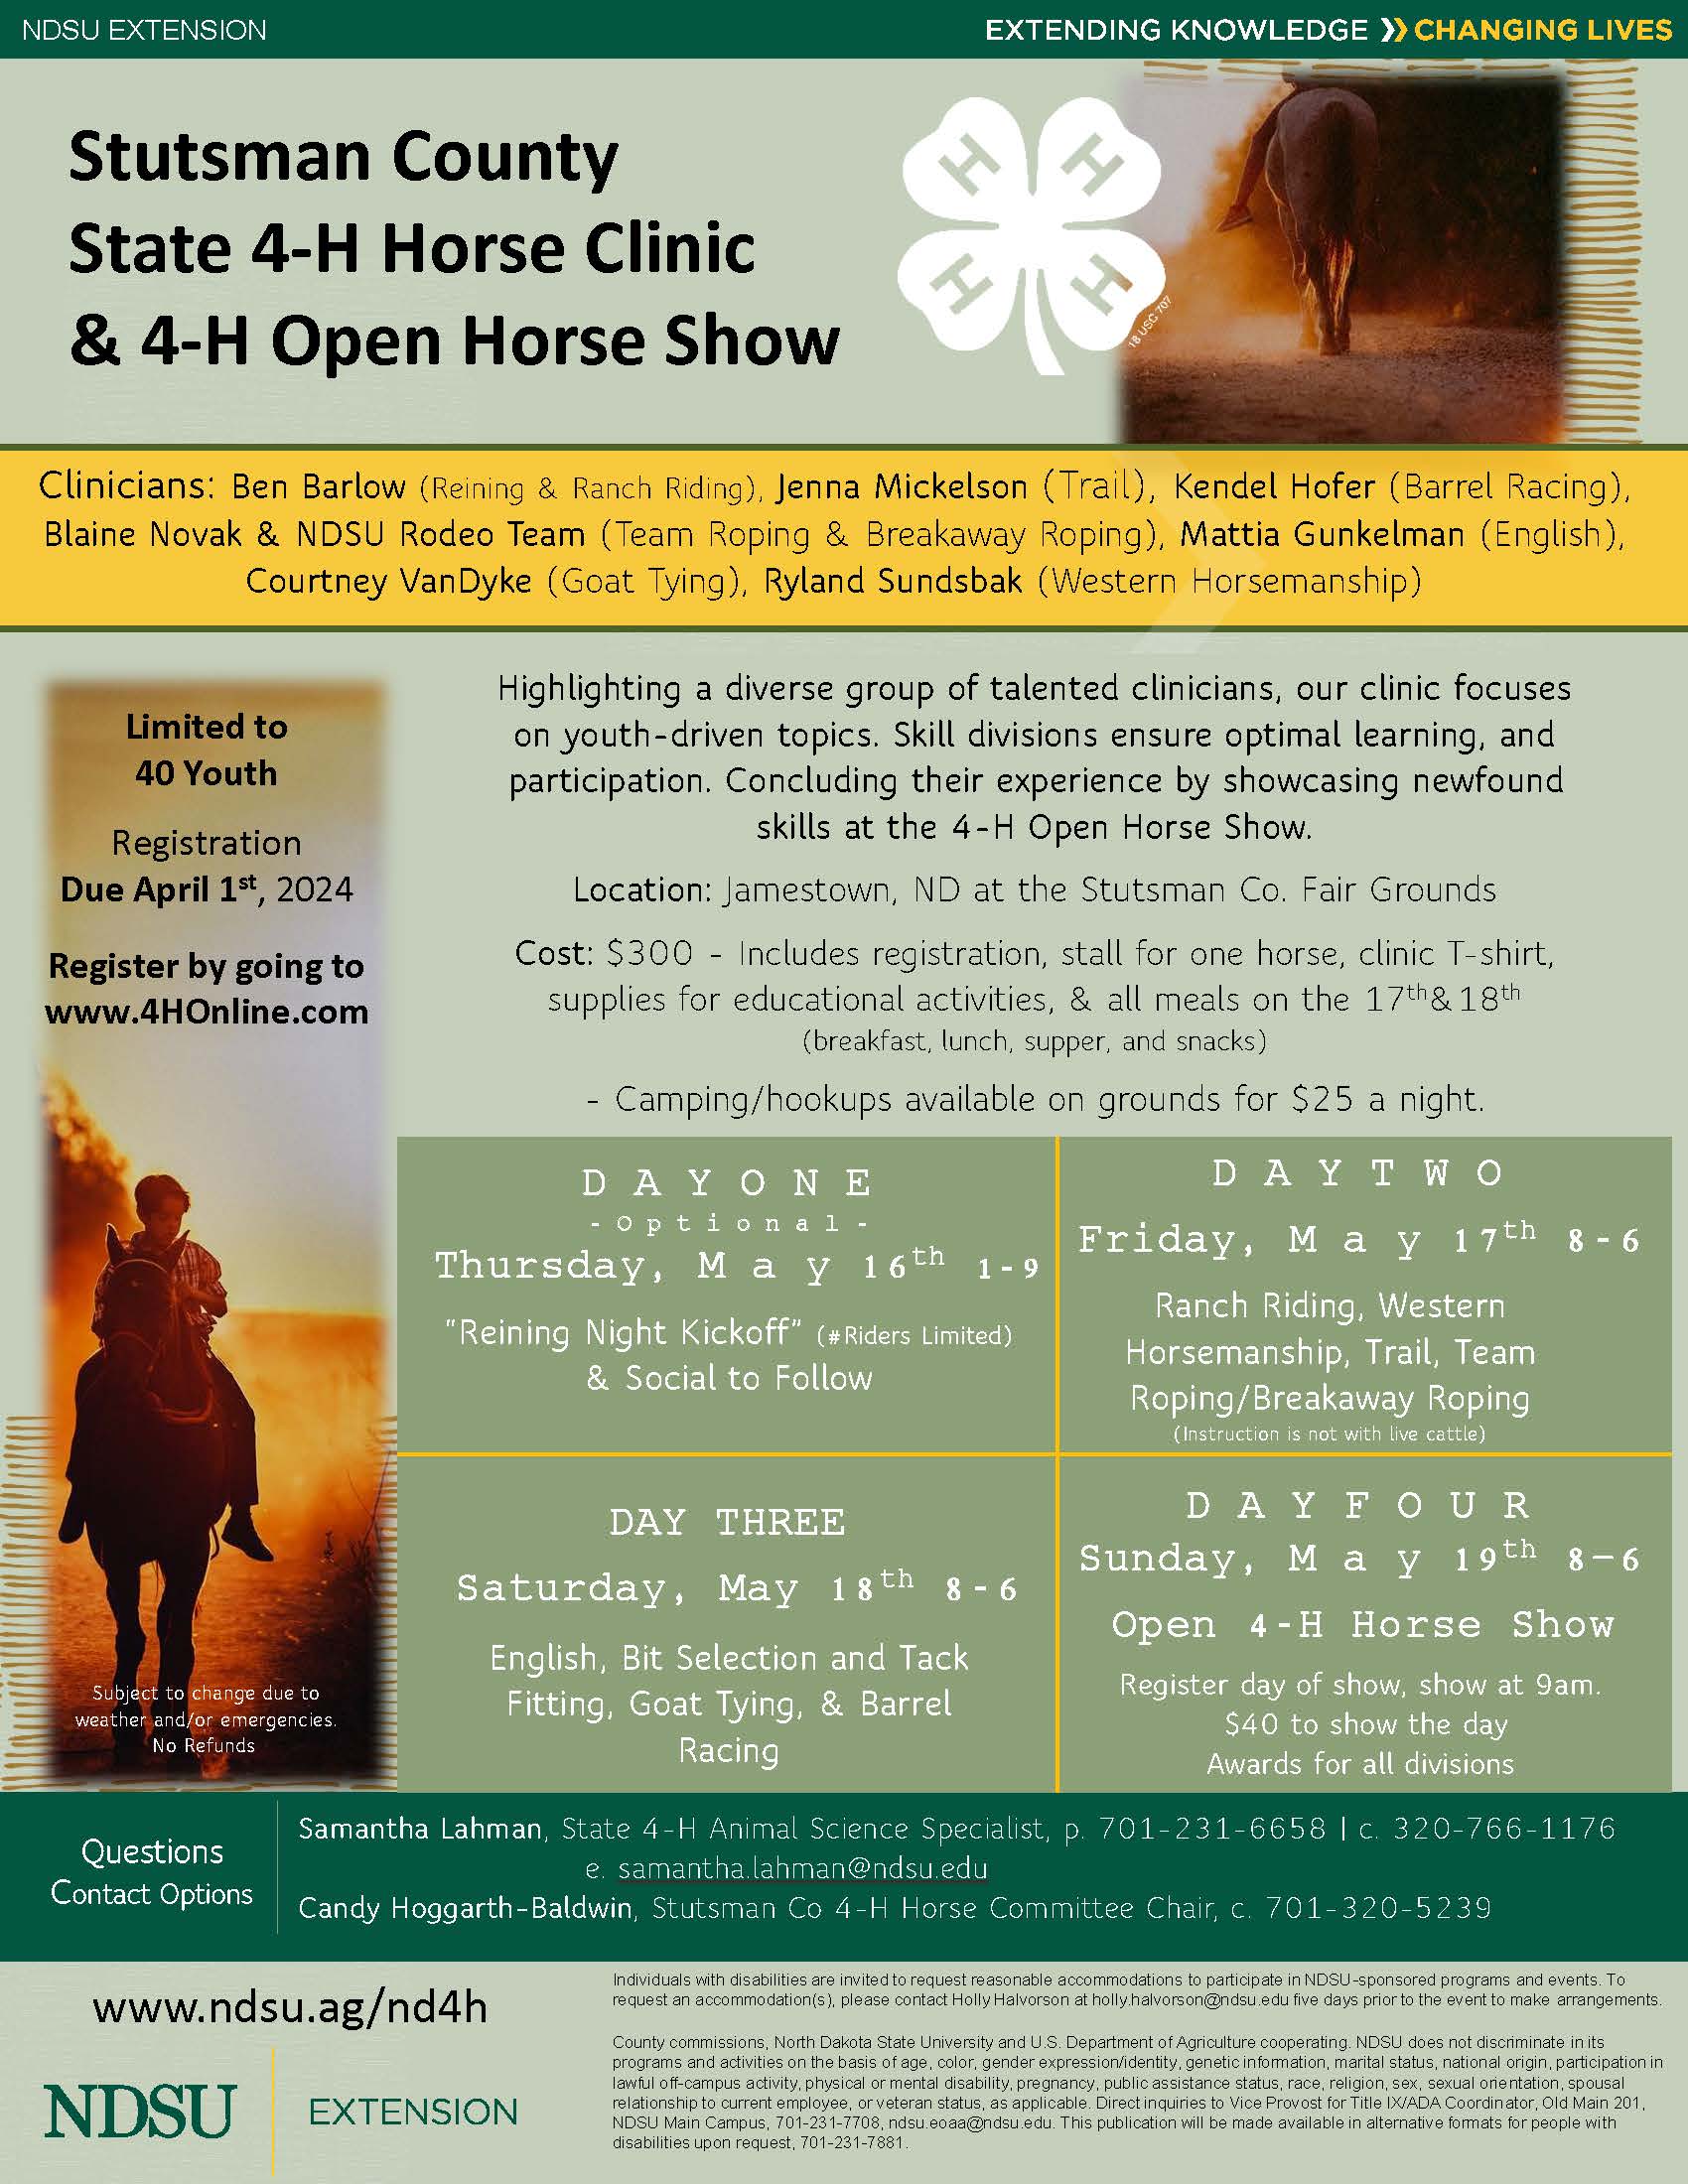 Horse clinic and horse show